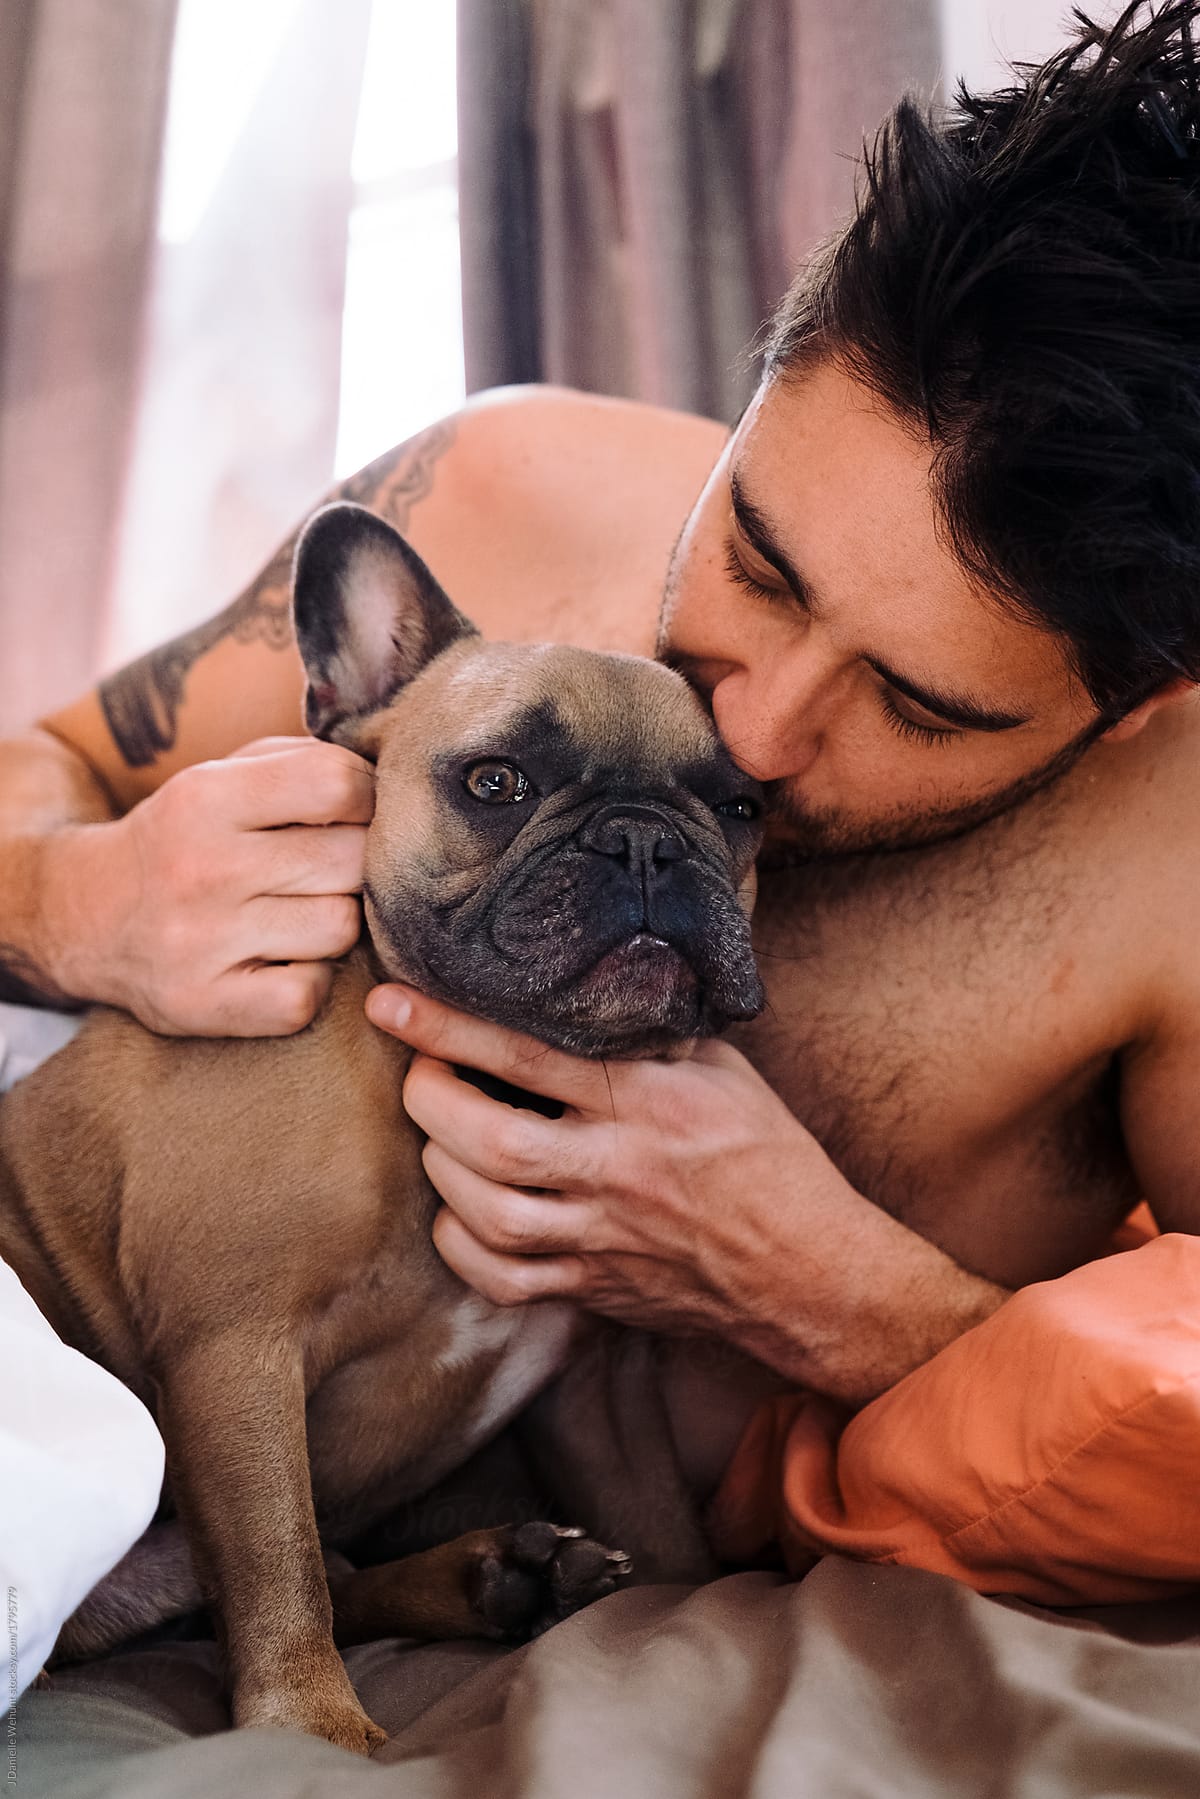 A caucasian man and a brown french bulldog cuddling together in bed